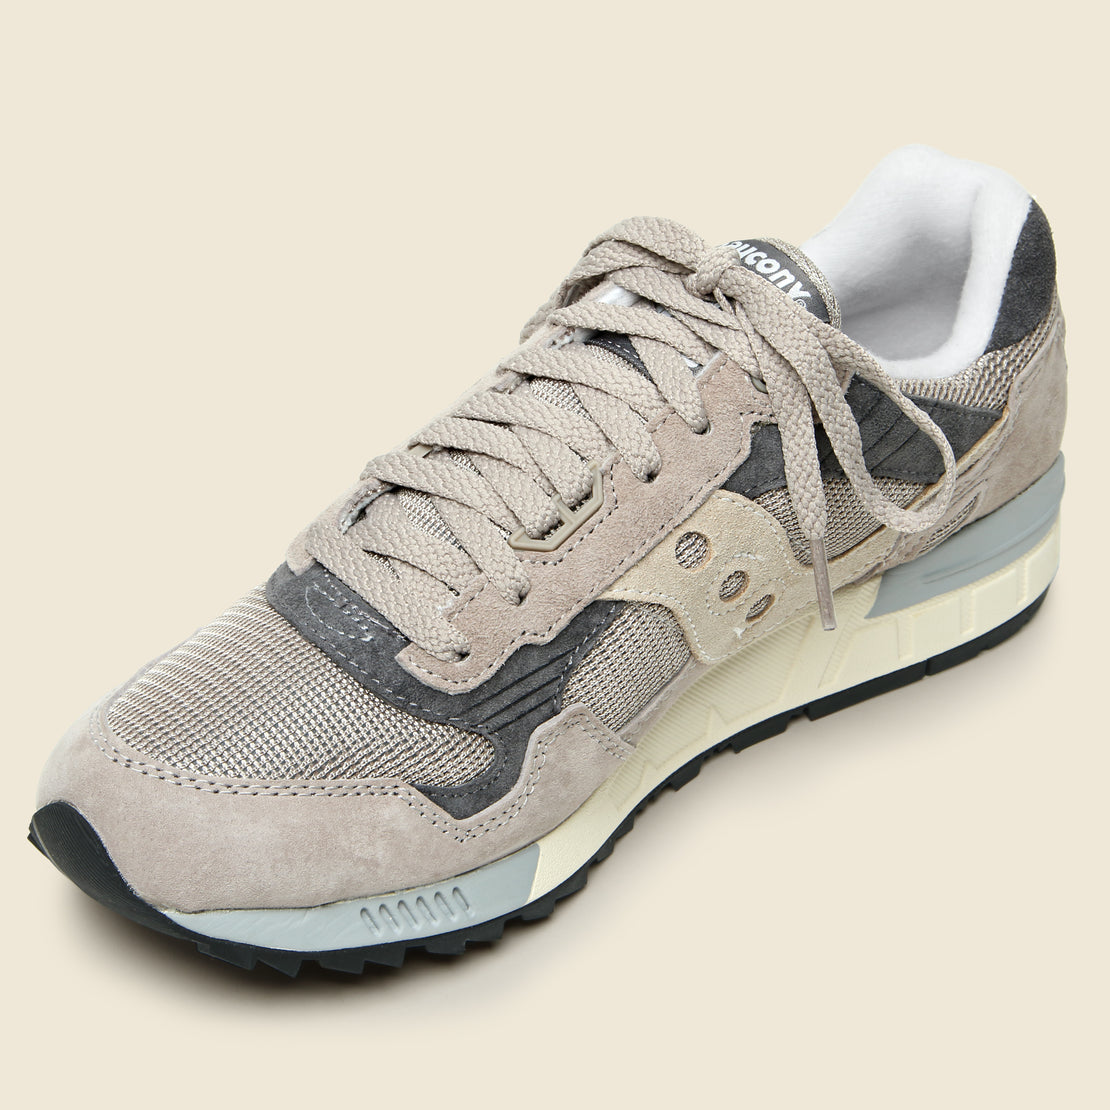 Shadow 5000 Essential Sneaker - Grey/Cream - Saucony - STAG Provisions - Shoes - Athletic